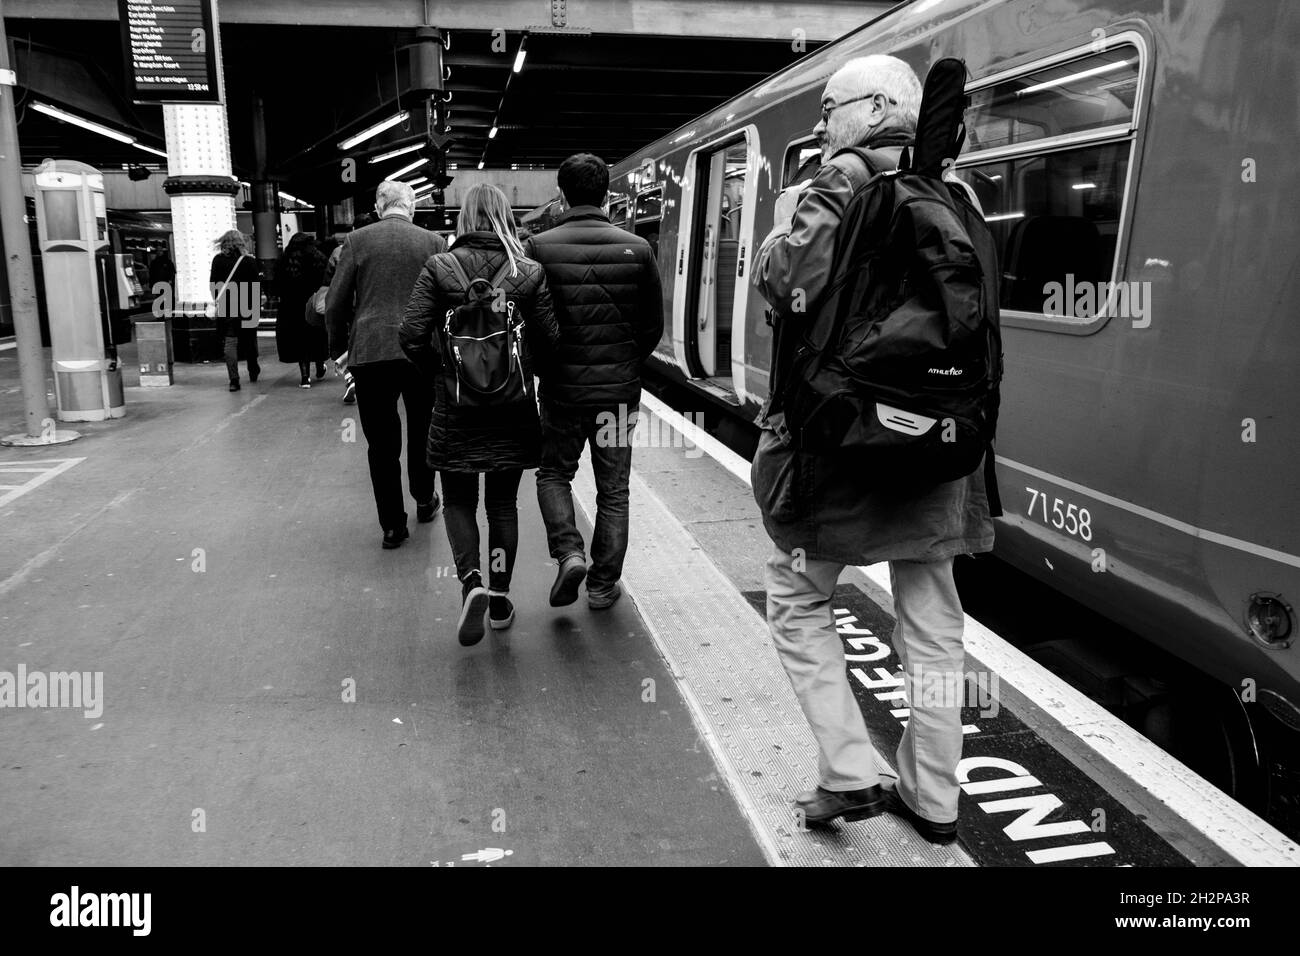 Anonymous Women And Men Passengers Leaving Or Disembarking A South Western Railway Train At Waterloo Station In London England UK Stock Photo